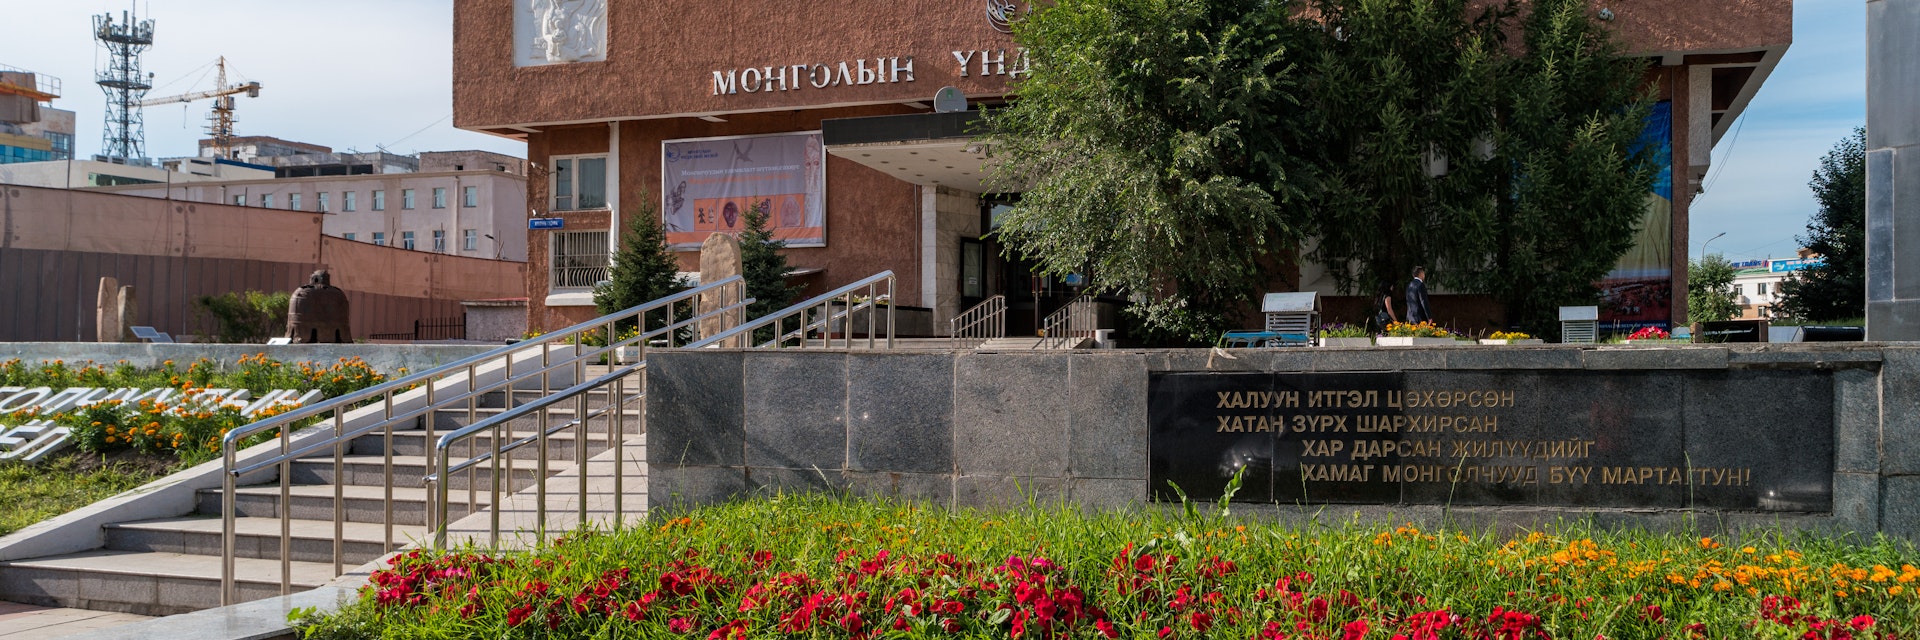 National Museum of Mongolia. 